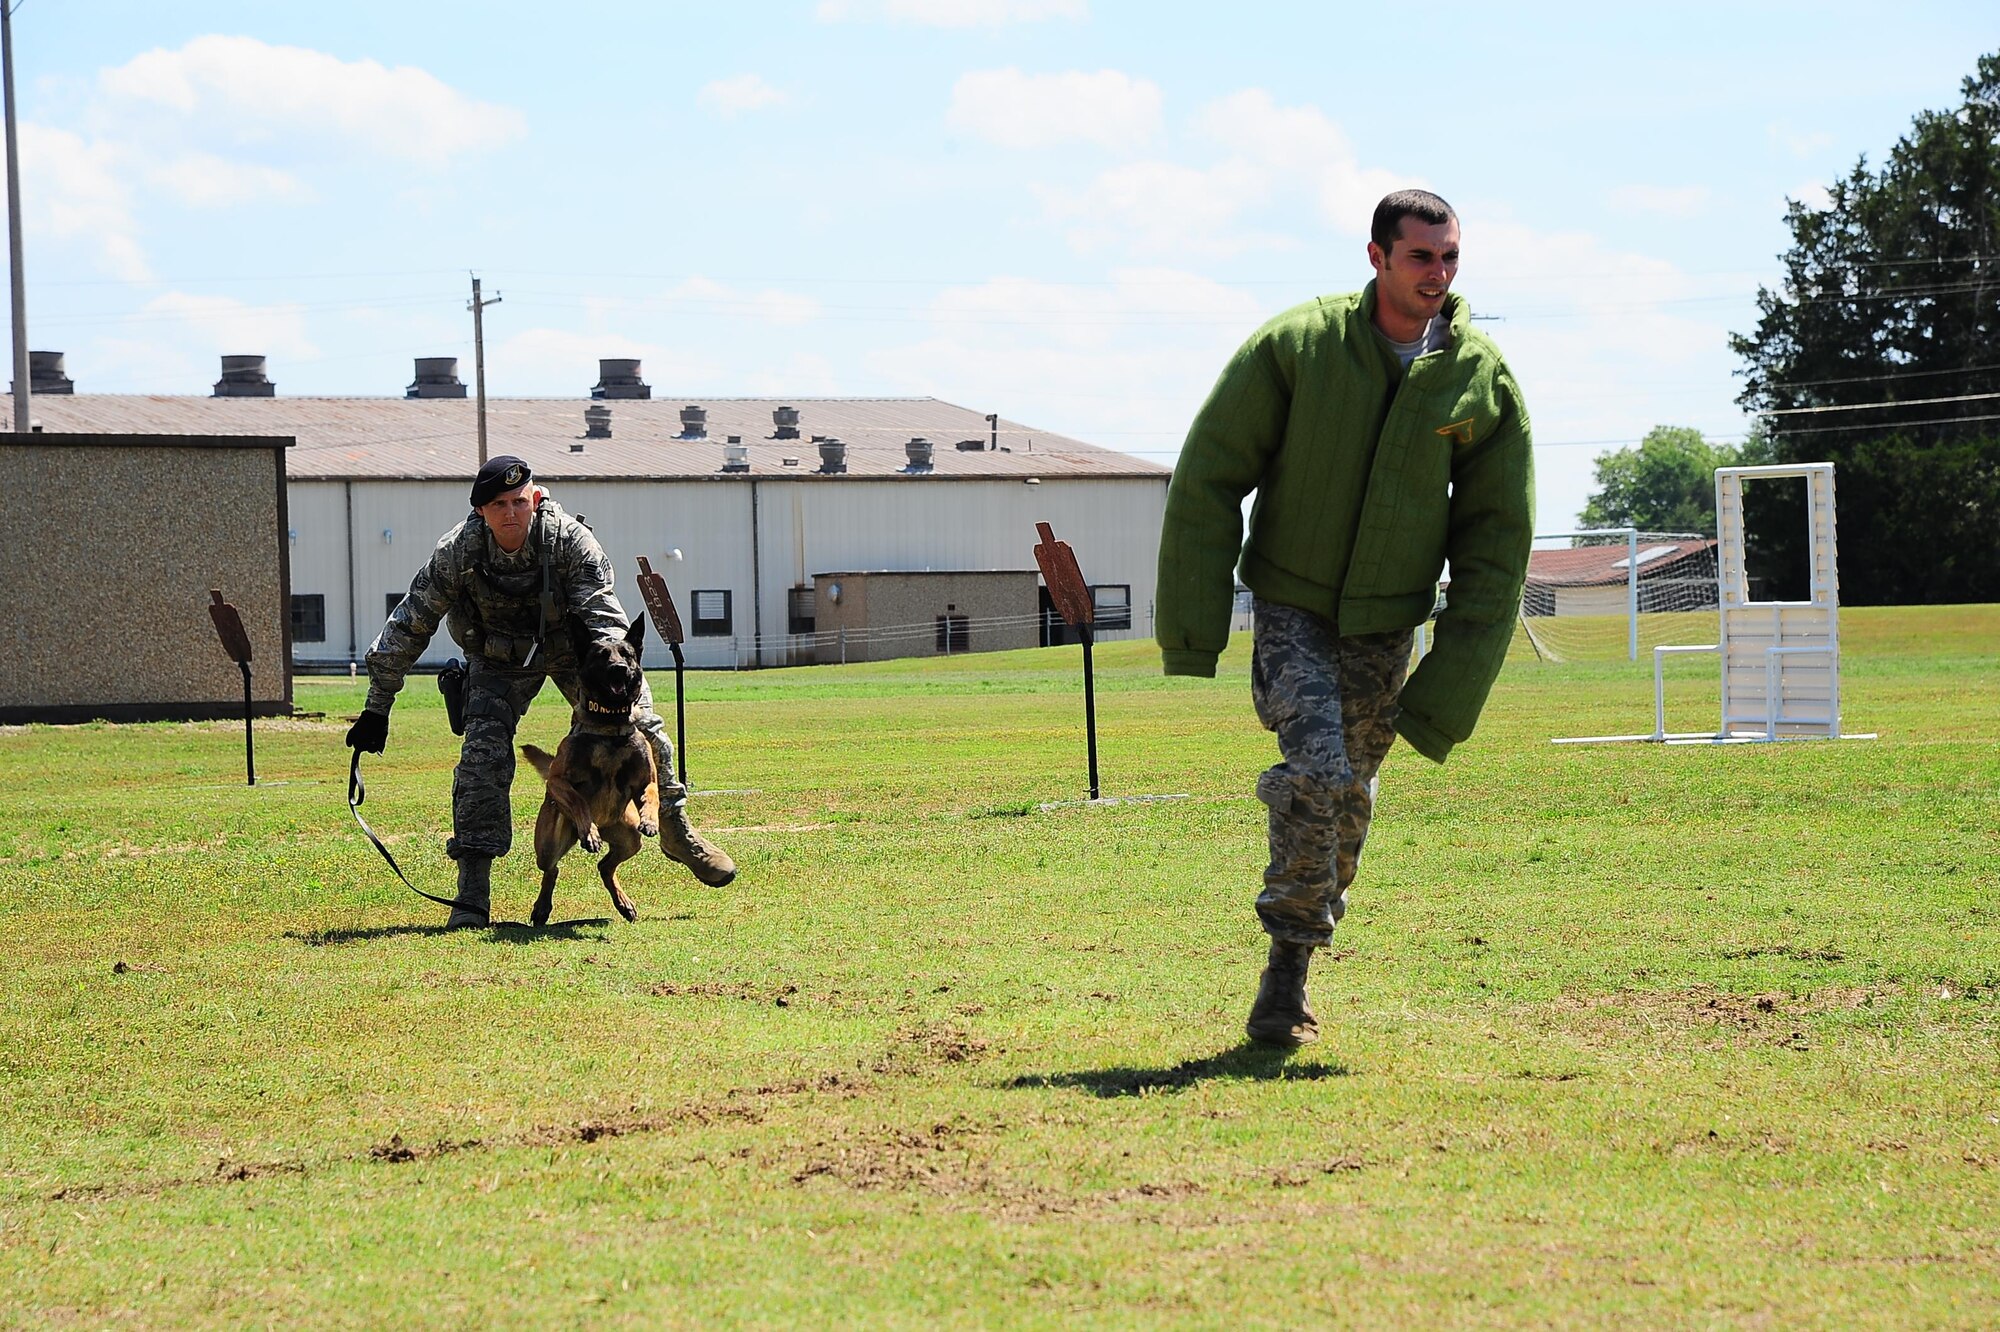 Staff Sgt. Derek Mortensen, 14th Security Forces Squadron Military Working Dog Handler, releases MWD Dito to attack a perpetrator, Senior Airman Zachary Kunkler, 14th SFS MWD Handler, during a demonstration May 16, 2017, at Columbus Air Force Base, Mississippi. The demonstration was in honor of Police Week and raising awareness for the many different jobs that Defenders do in order to keep Air Force bases and assets safe. (U.S. Air Force photo by Airman 1st Class Beaux Hebert)